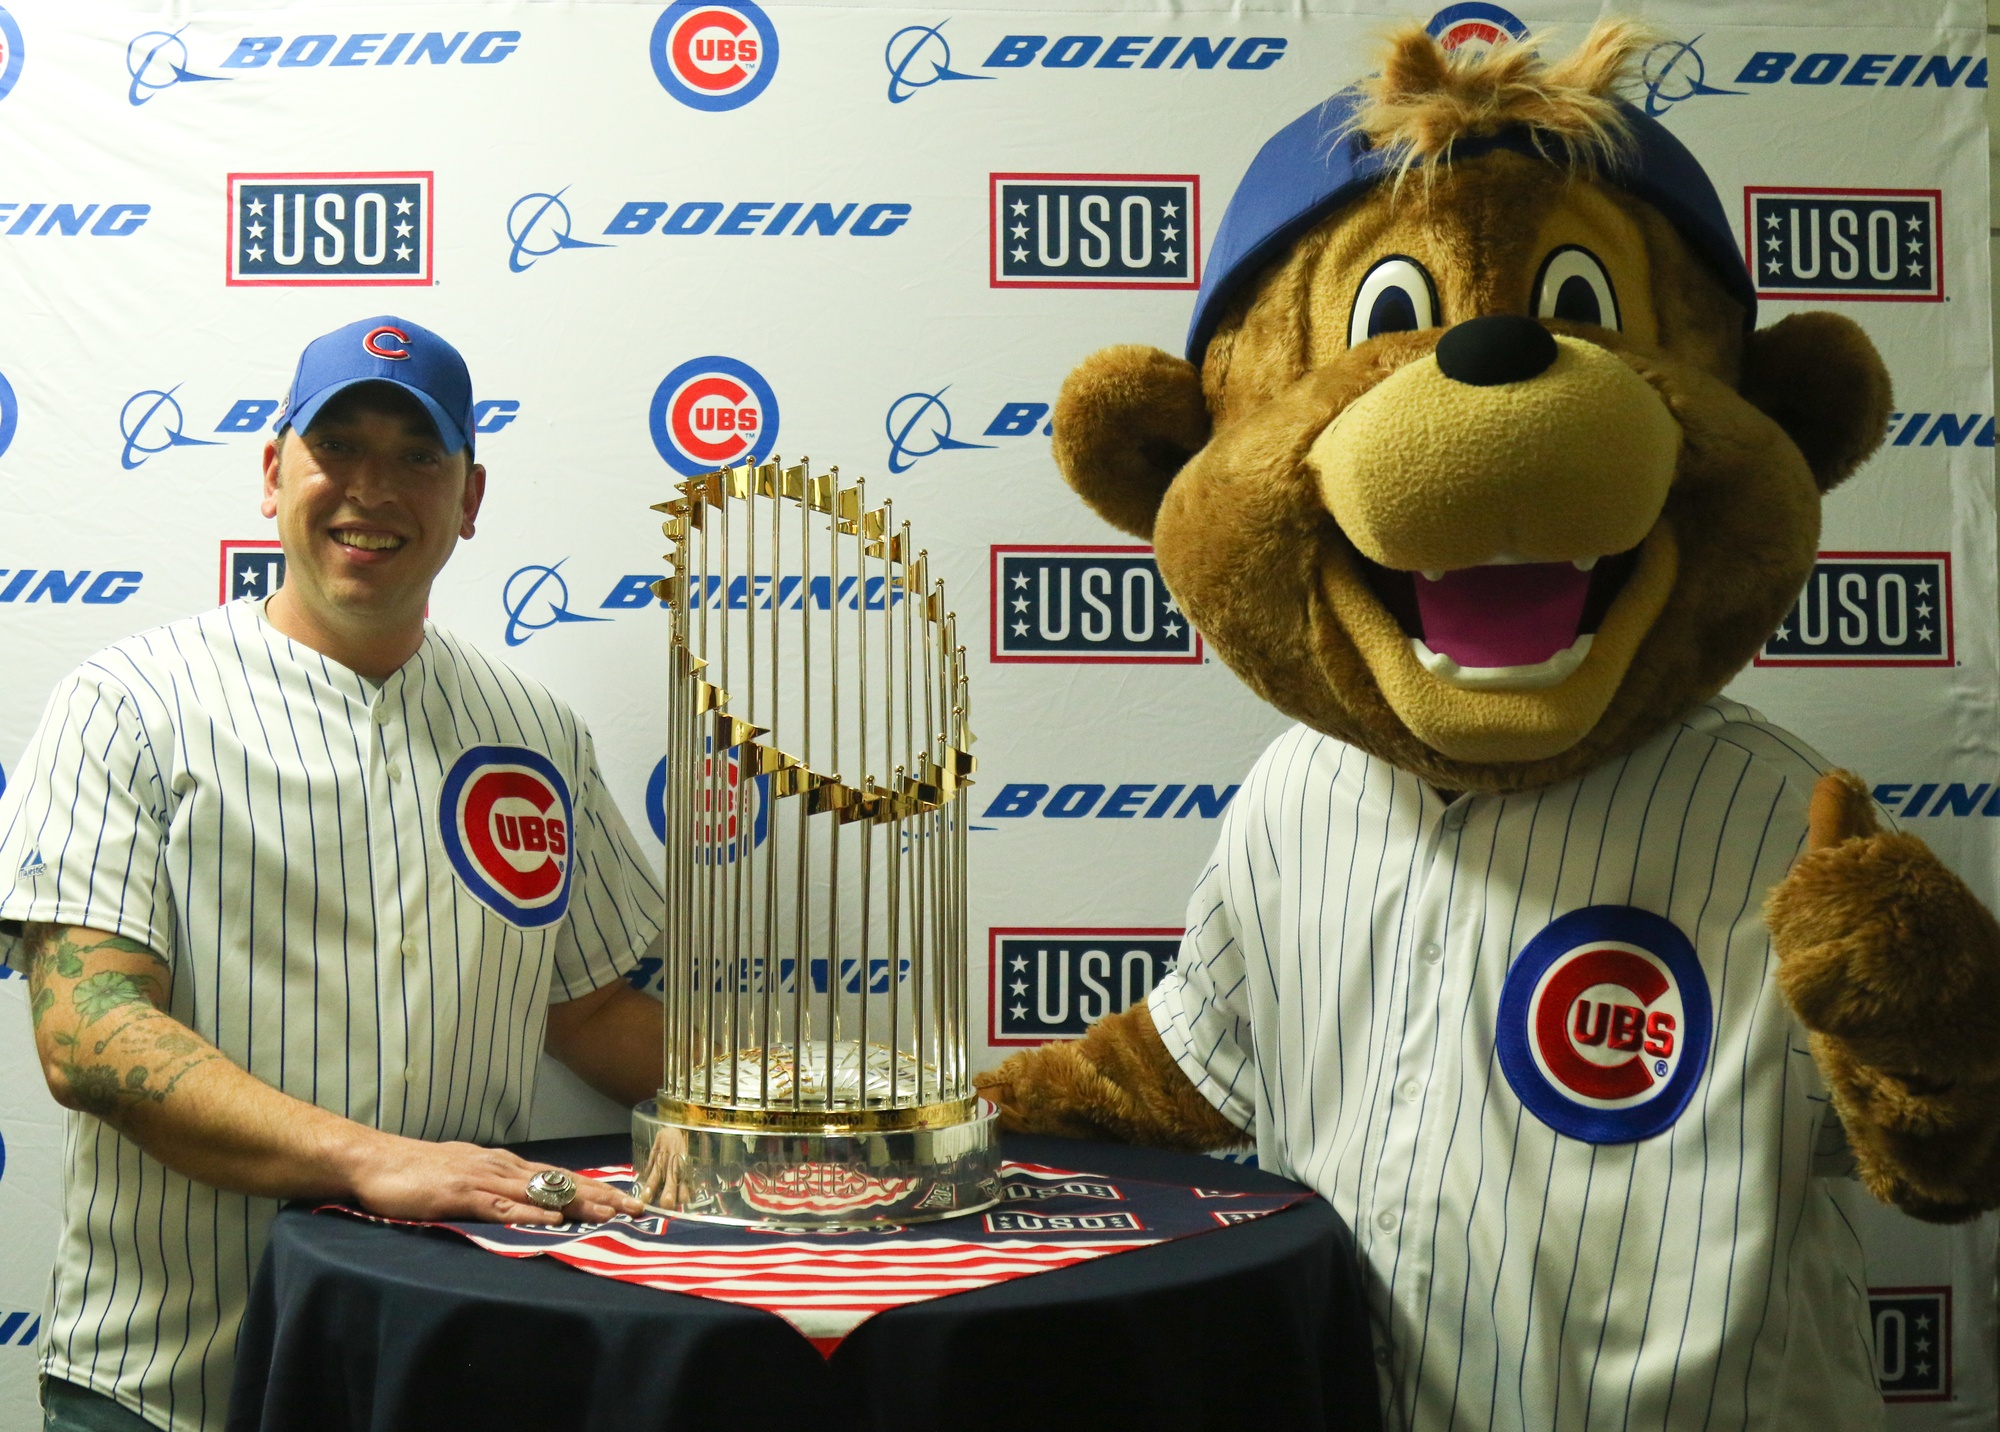 DVIDS - Images - U.S. Soldiers meet Chicago Cubs mascot [Image 7 of 10]